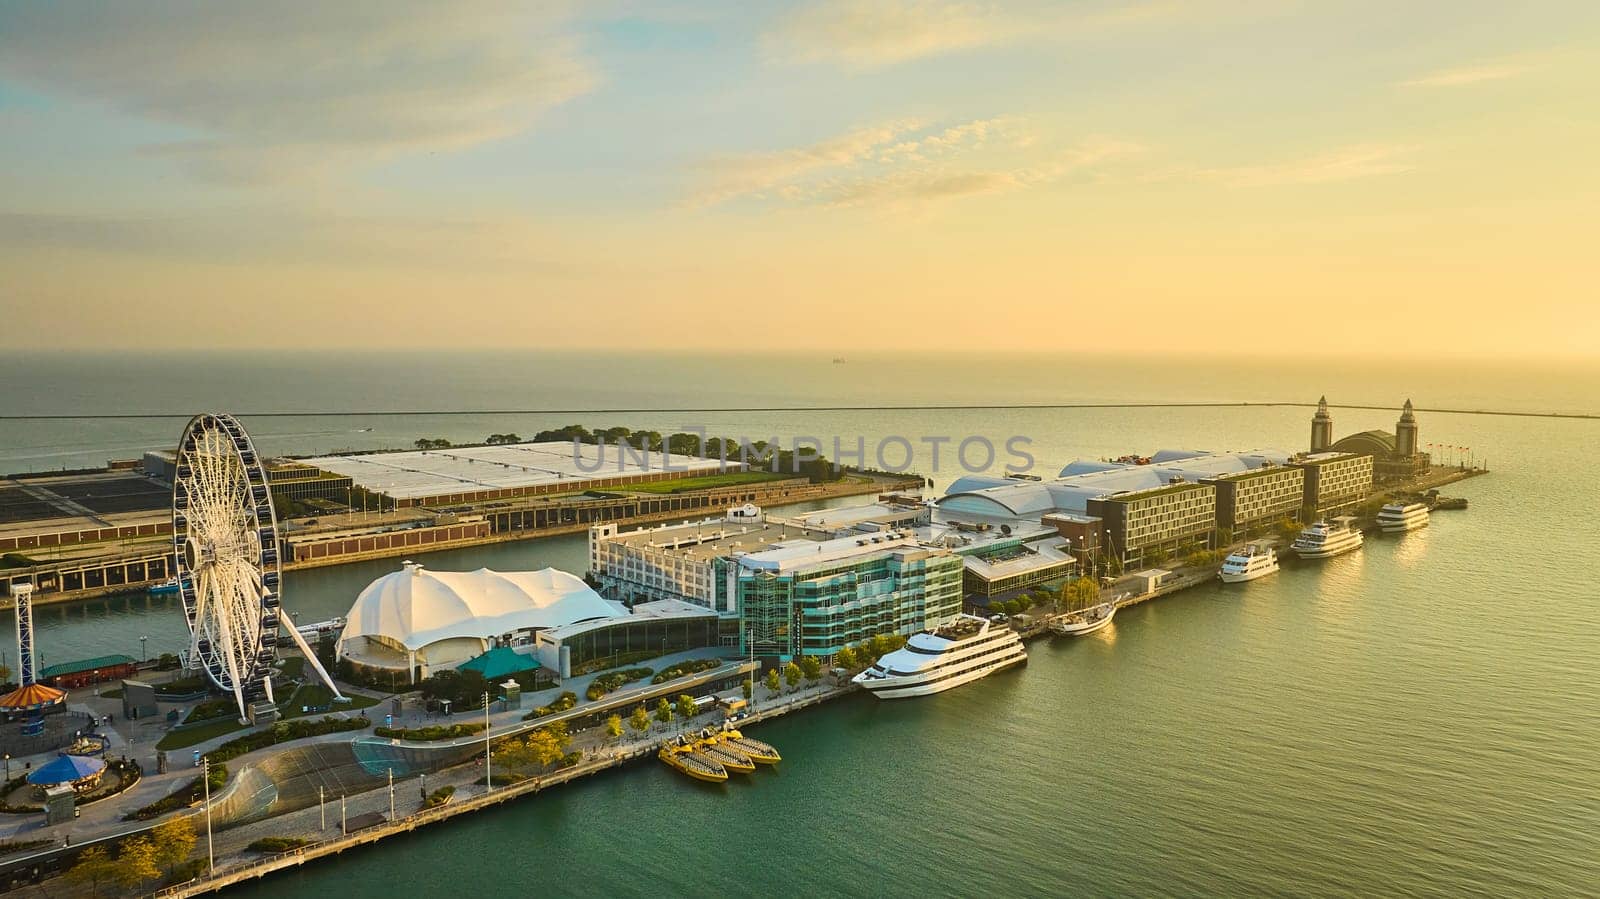 Navy Pier on Lake Michigan at sunrise with aerial of Centennial Wheel at dawn, Chicago, IL by njproductions